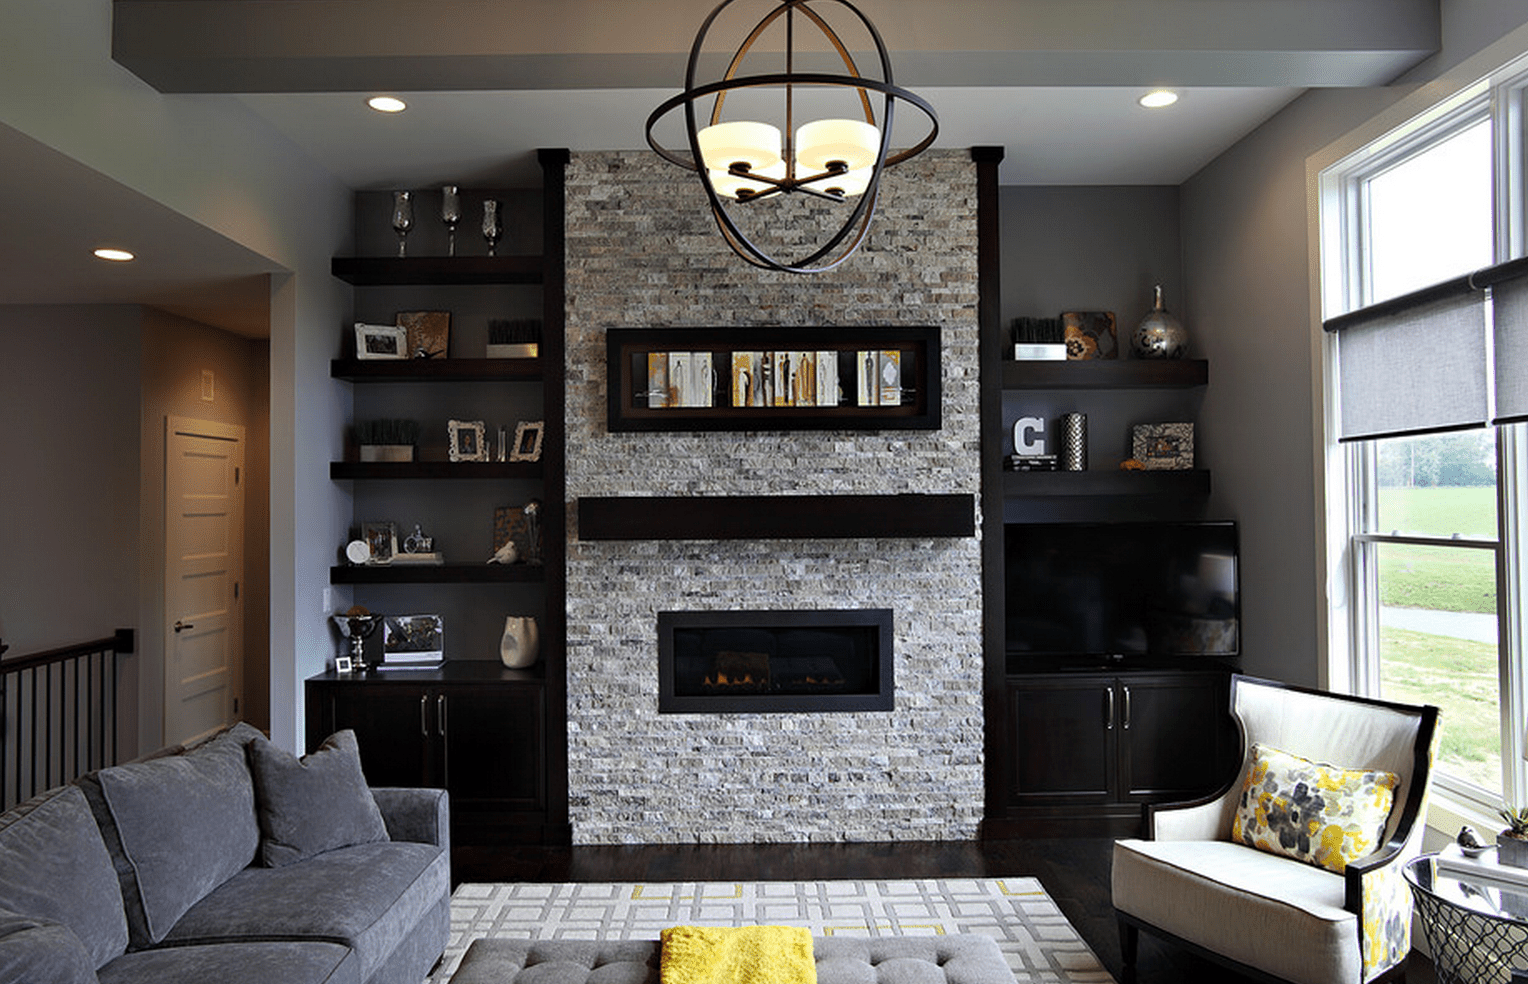 Decorating Ideas for Bookcases by Fireplace Awesome Beautiful Living Rooms with Built In Shelving